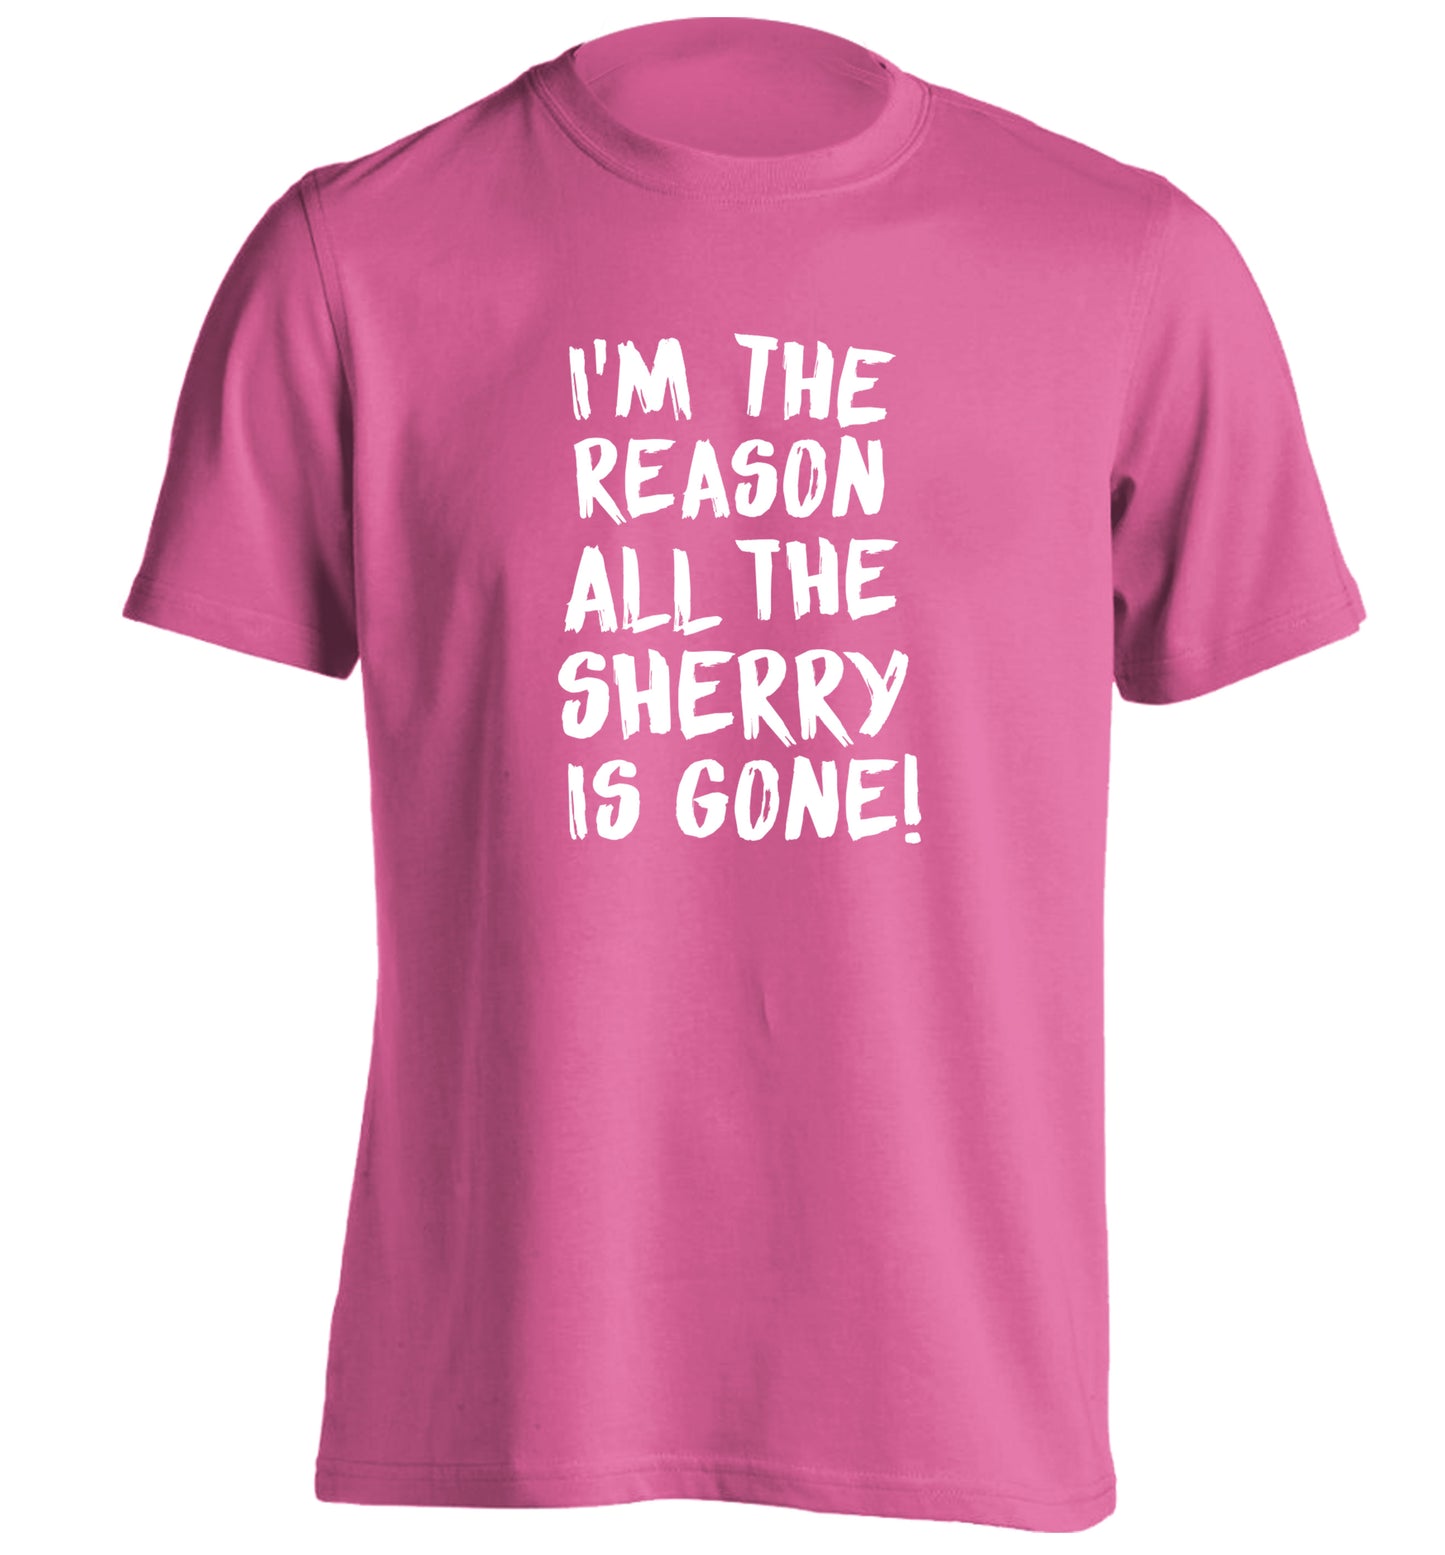 I'm the reason all the sherry is gone adults unisex pink Tshirt 2XL